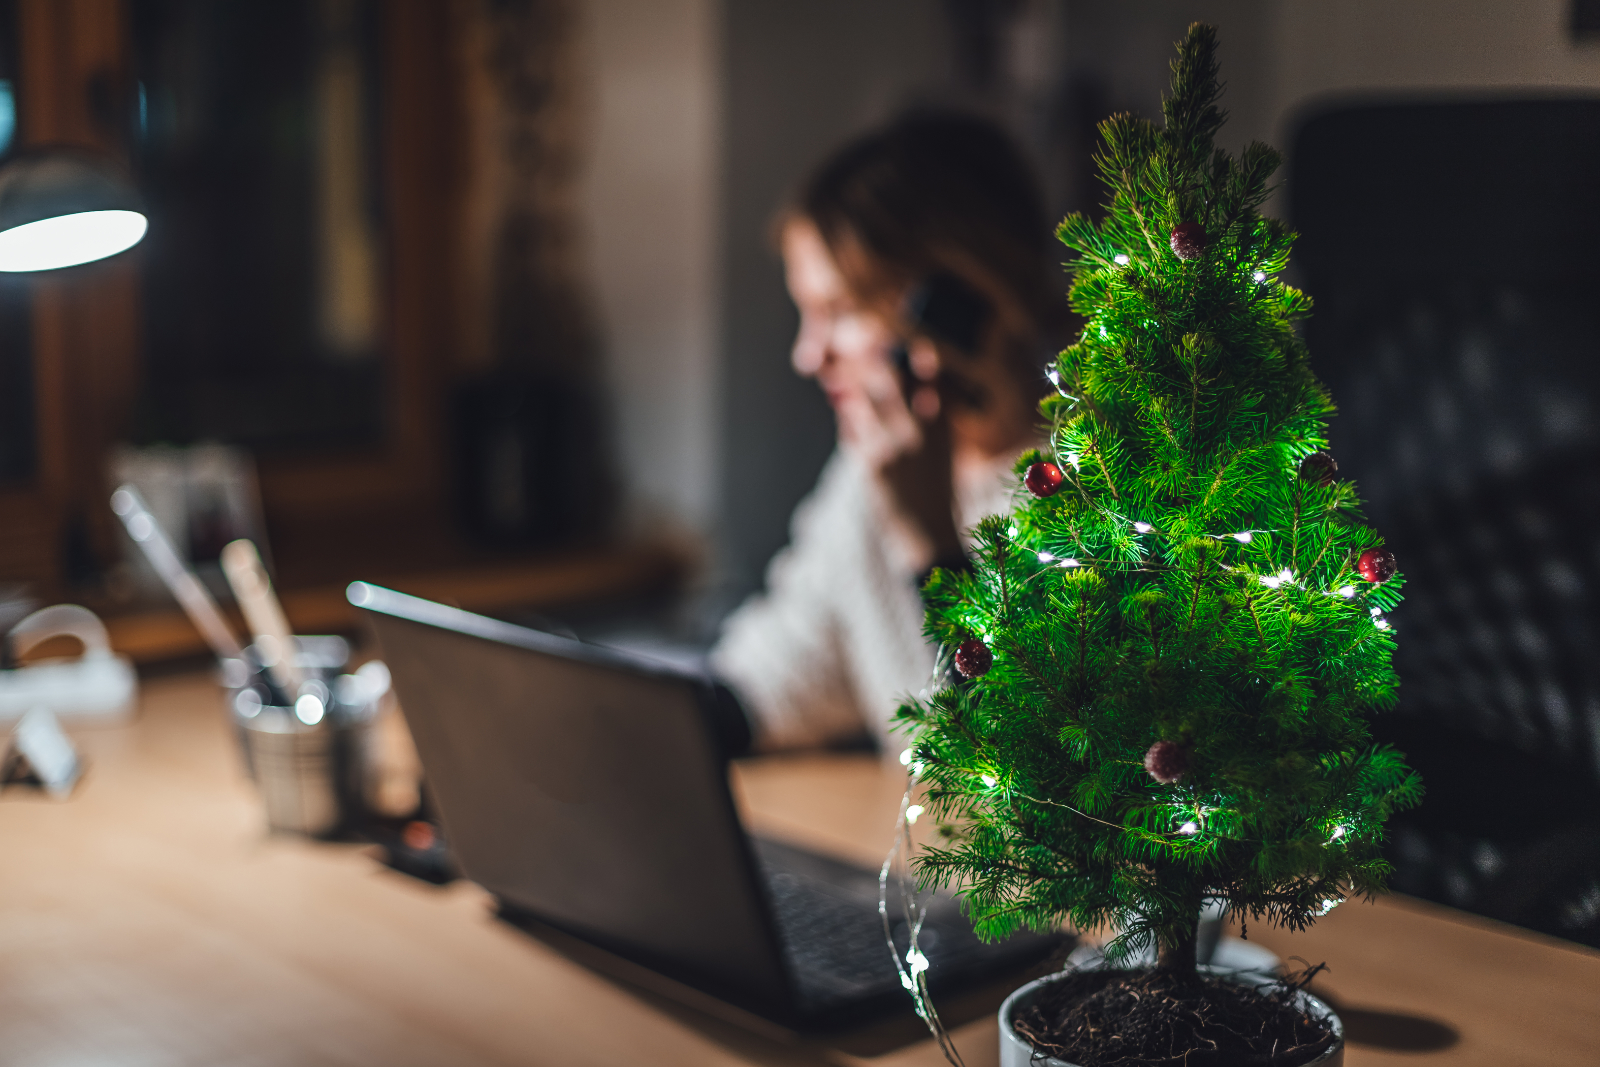 Feeling The Spirit: Good Ideas To Decorate The Office For The Holidays